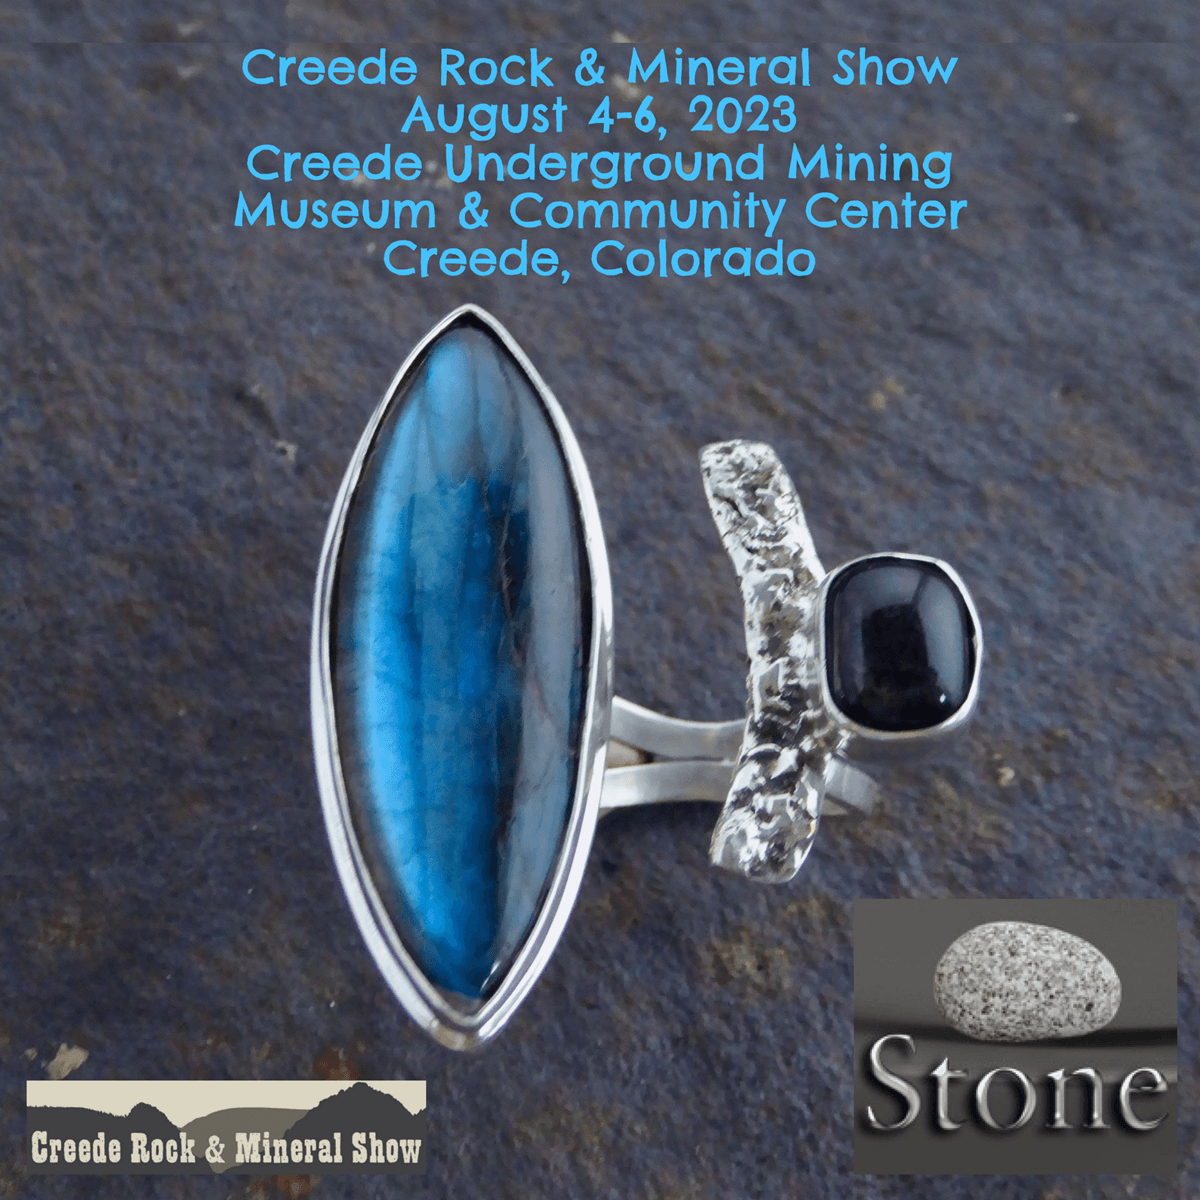 Creede Rock & Mineral Show 2023